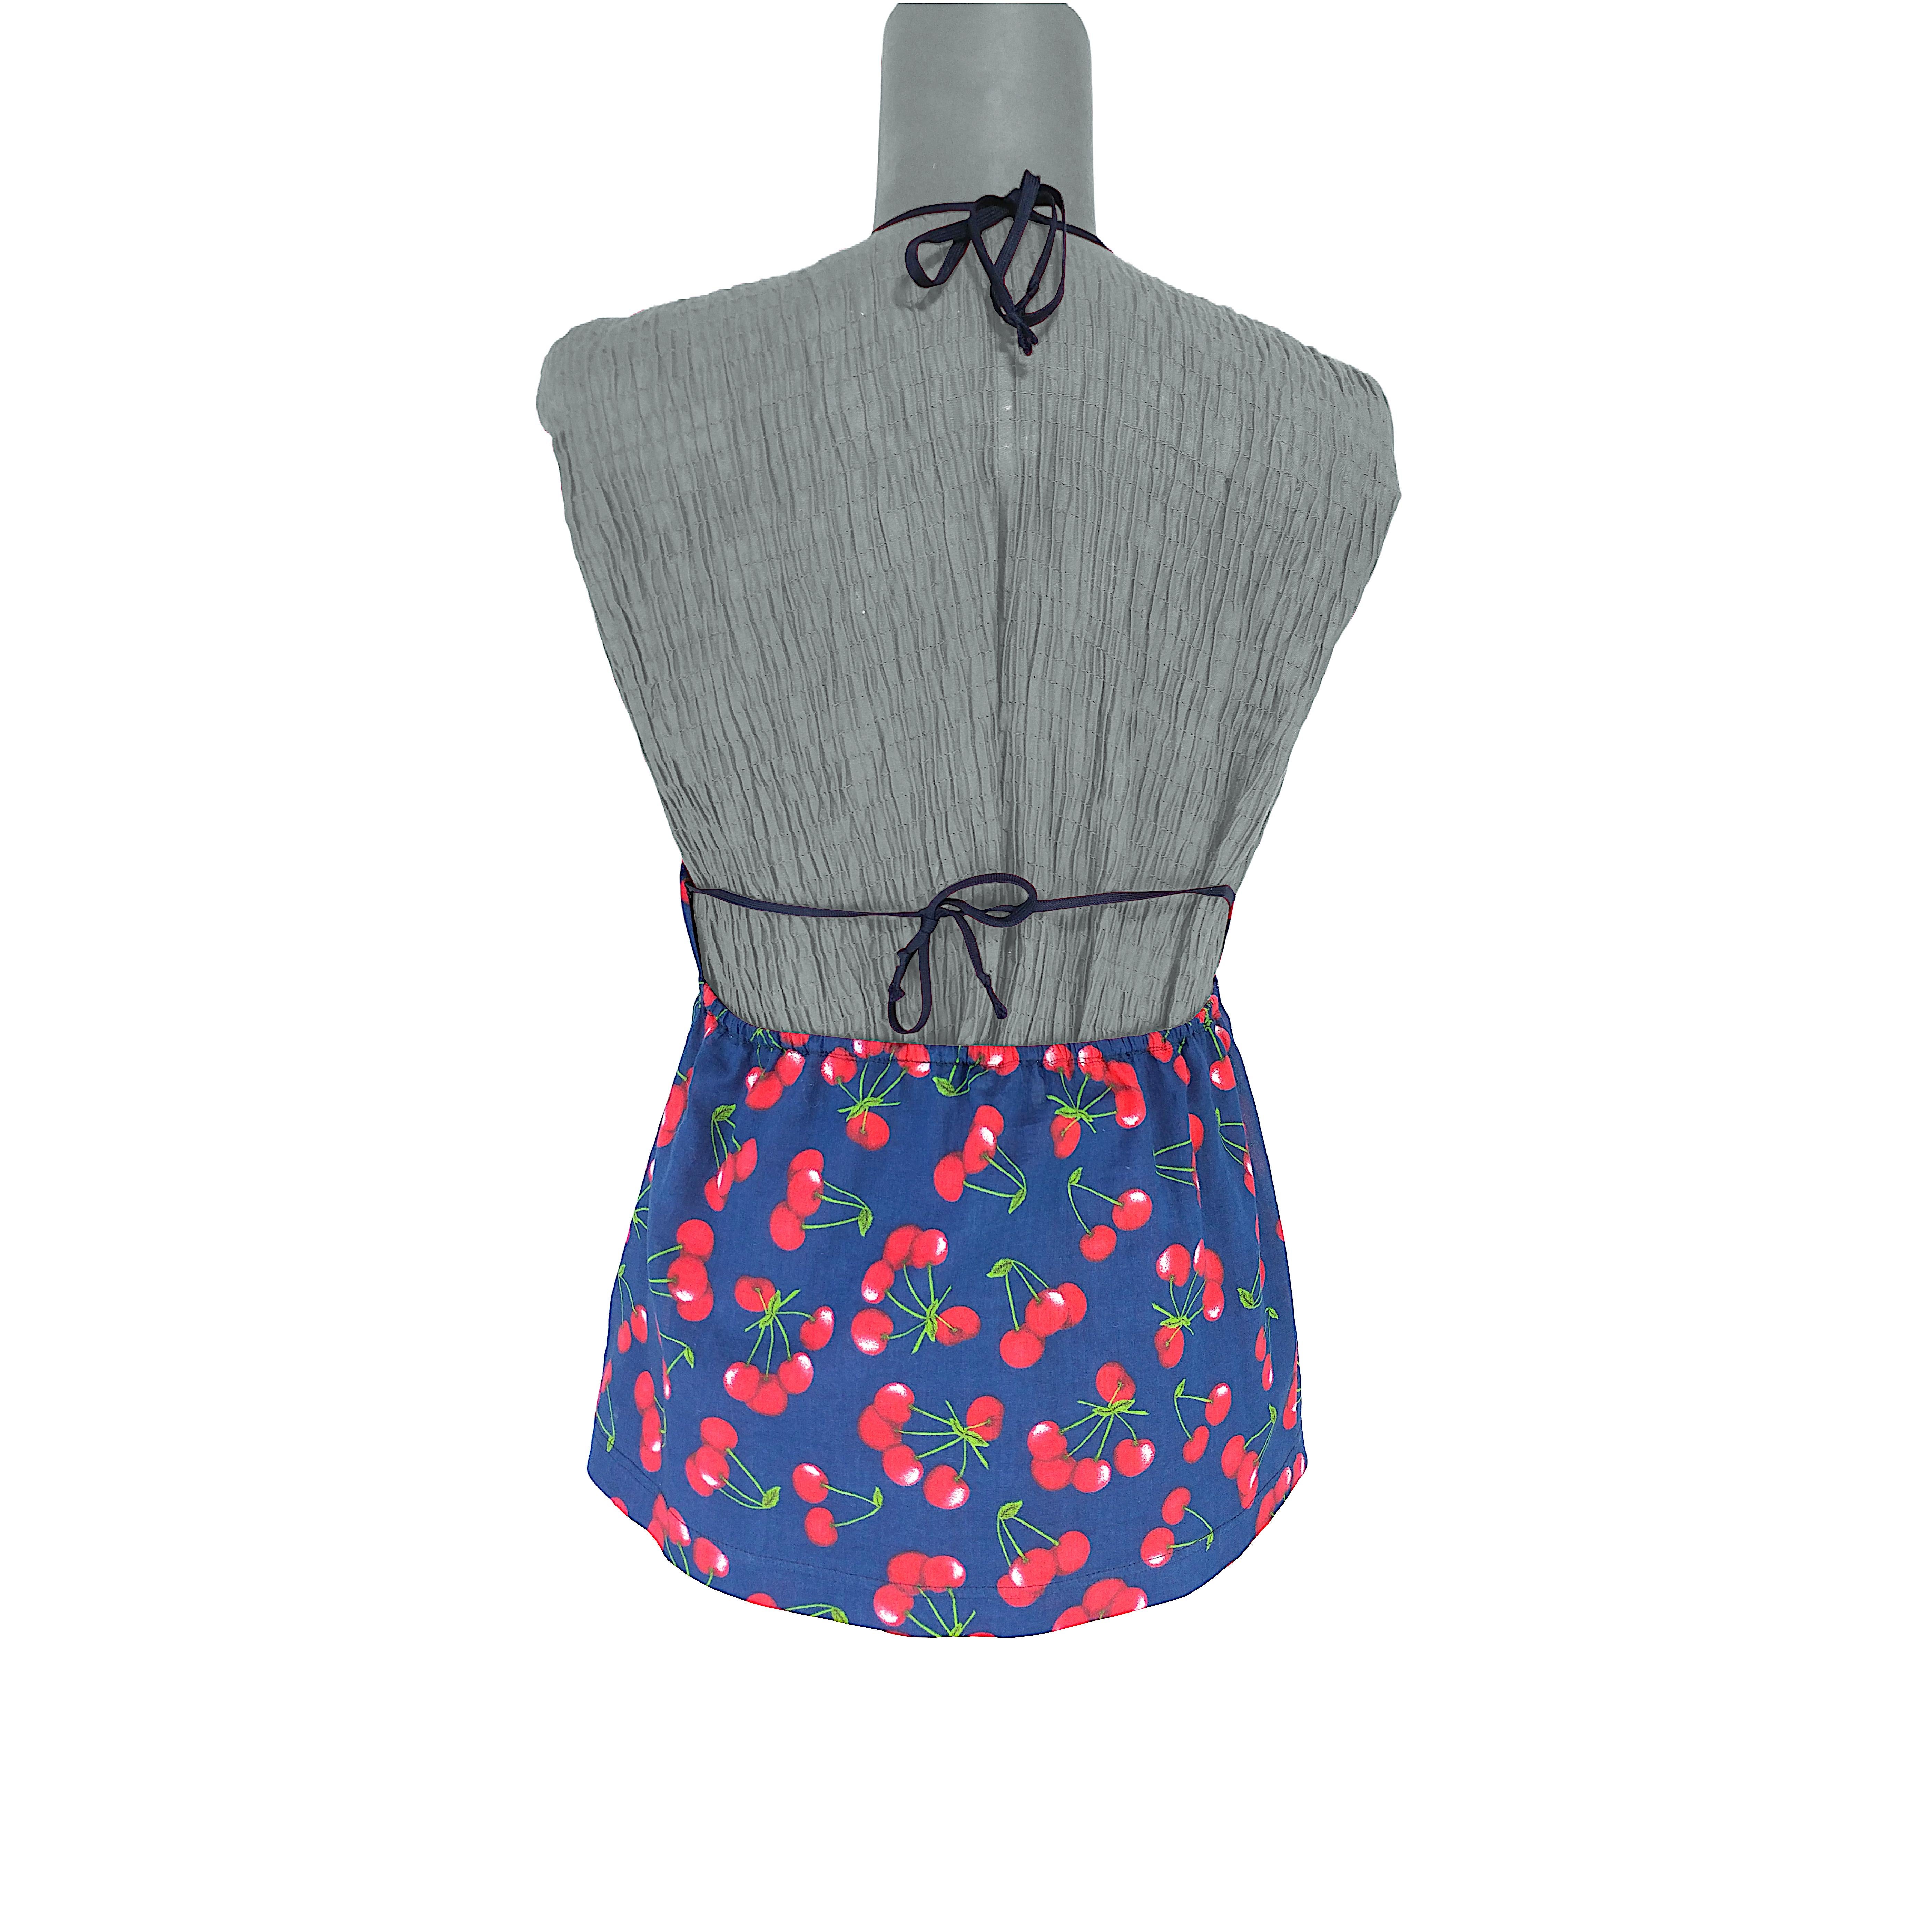 A tank top in pure blue cotton printed with an iconic handful of red cherries which has been used several times by the popular Italian designers duo. The top features a scoop neckline and a double string closure, one in the back and one on the neck.